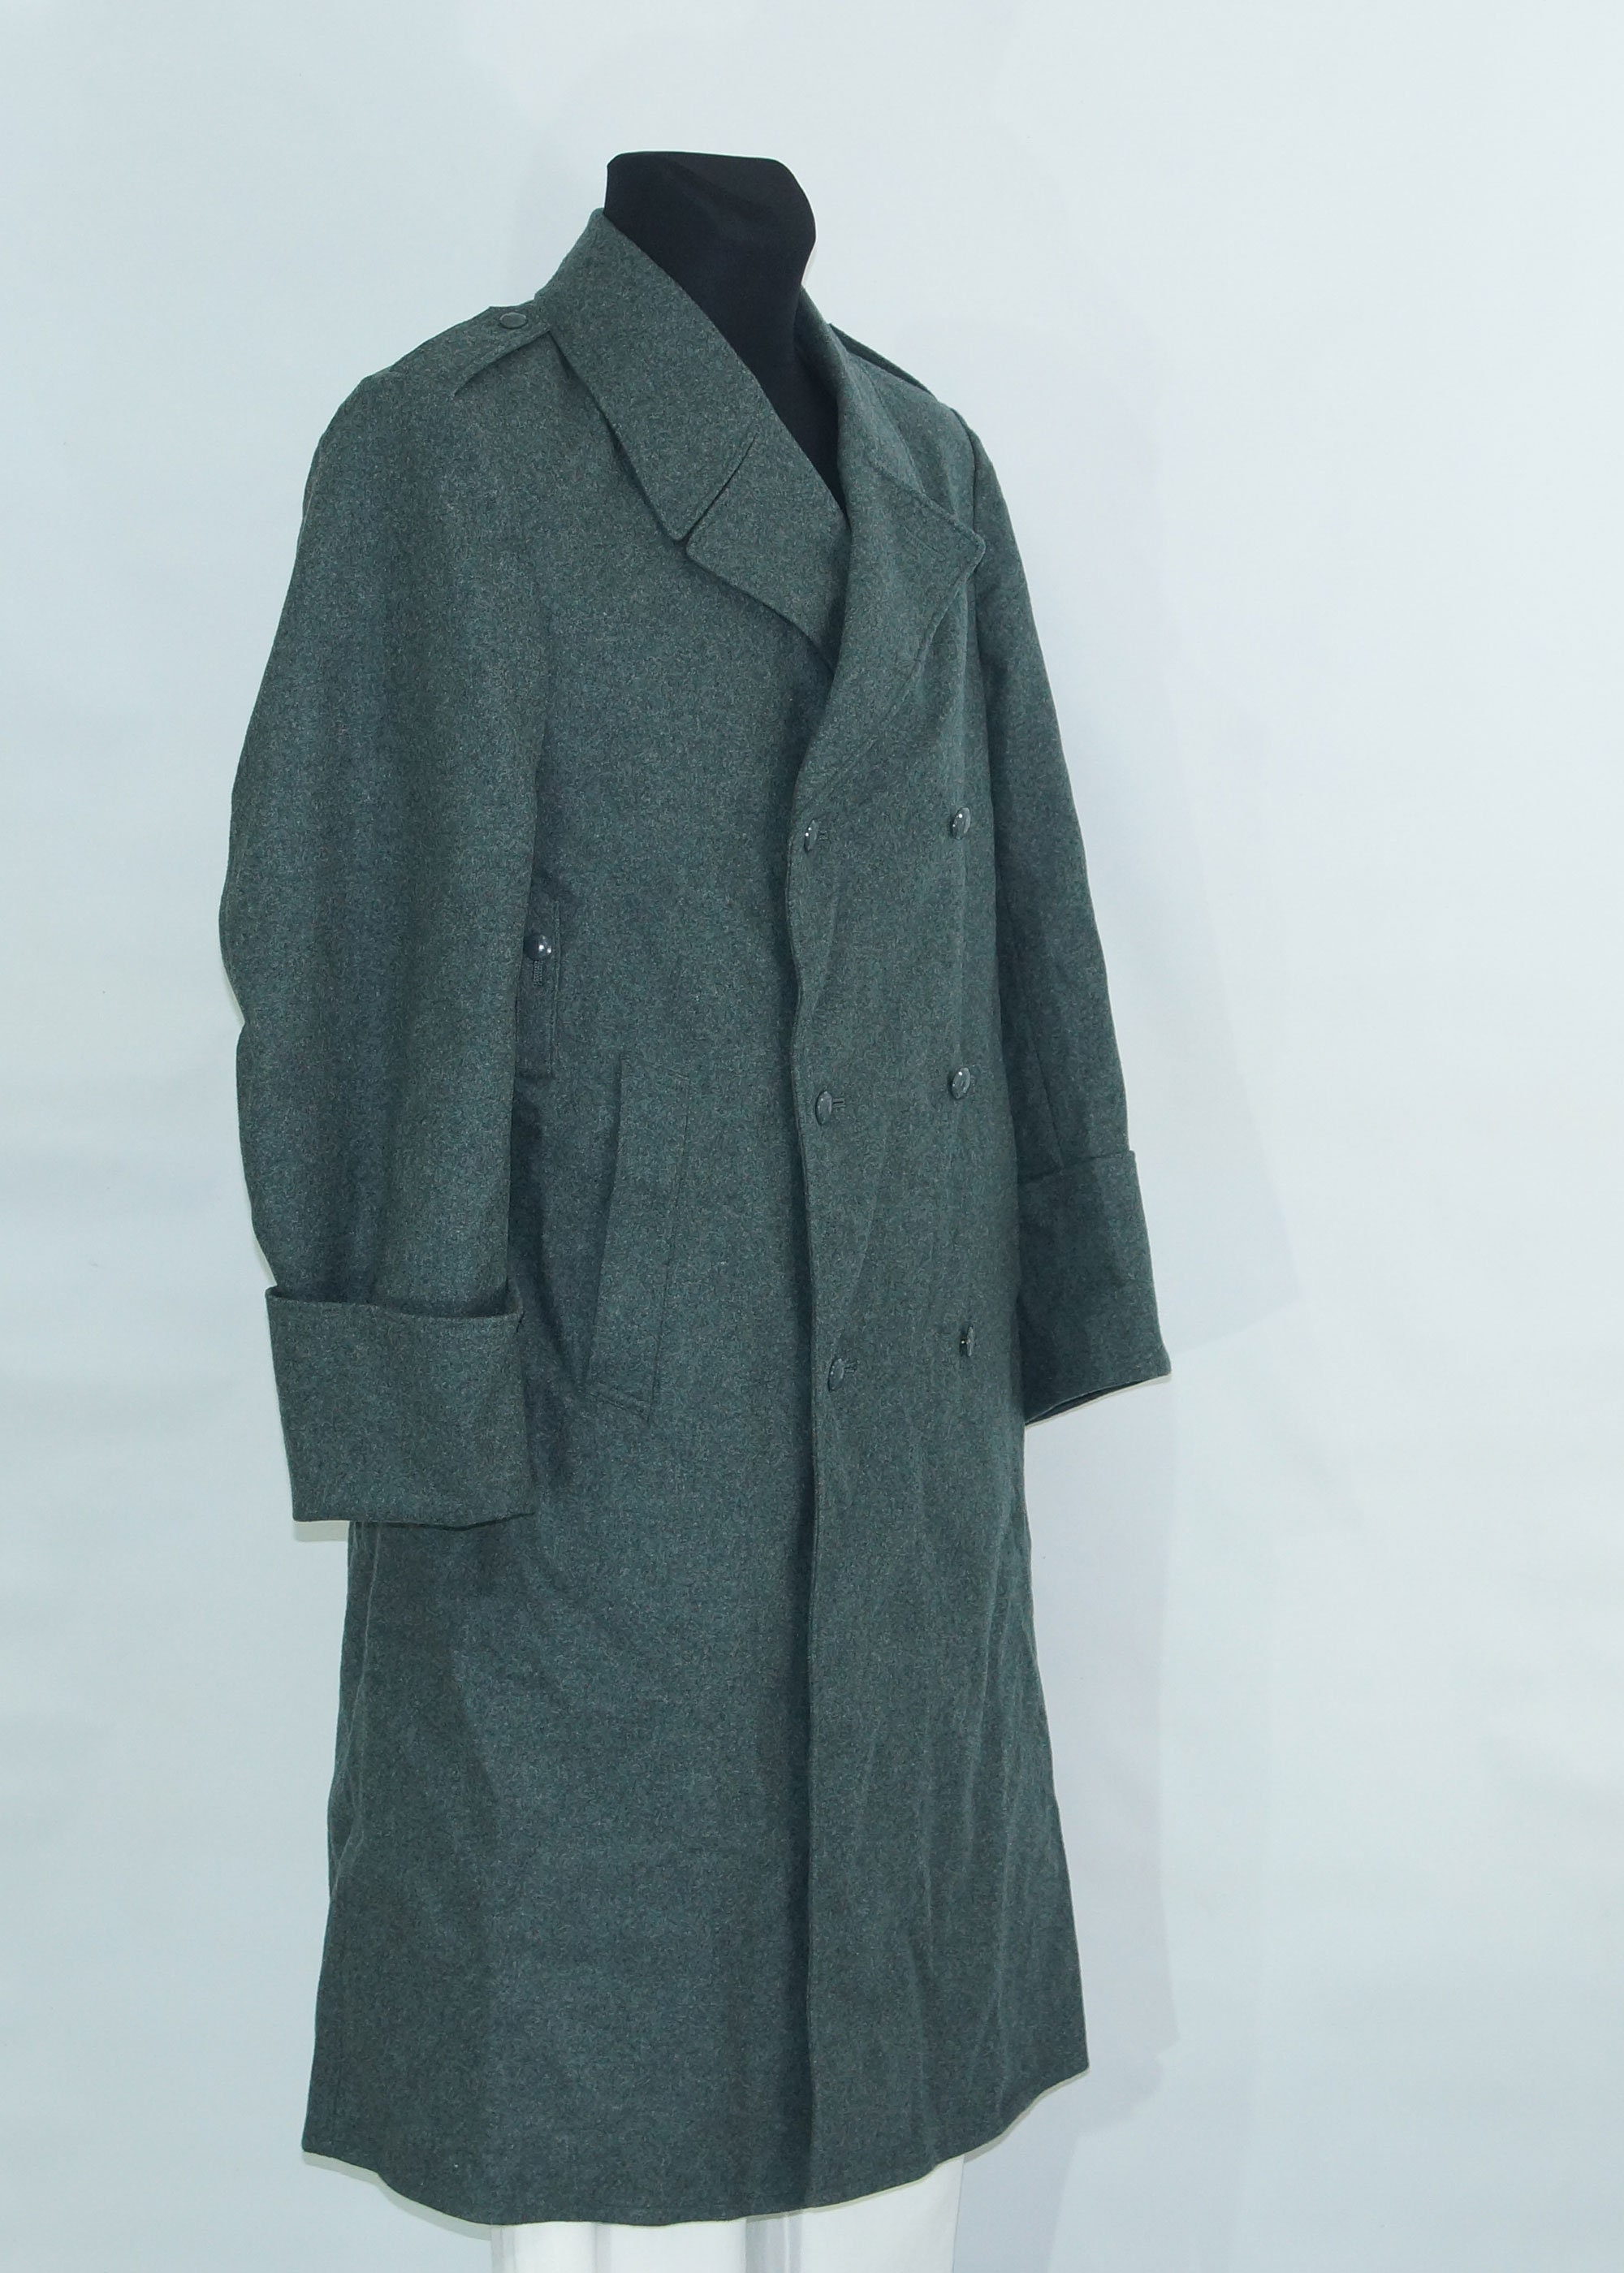 Vintage Swiss wool military greatcoat long trench coat double breasted  Swiss army long overcoat marked size 54N